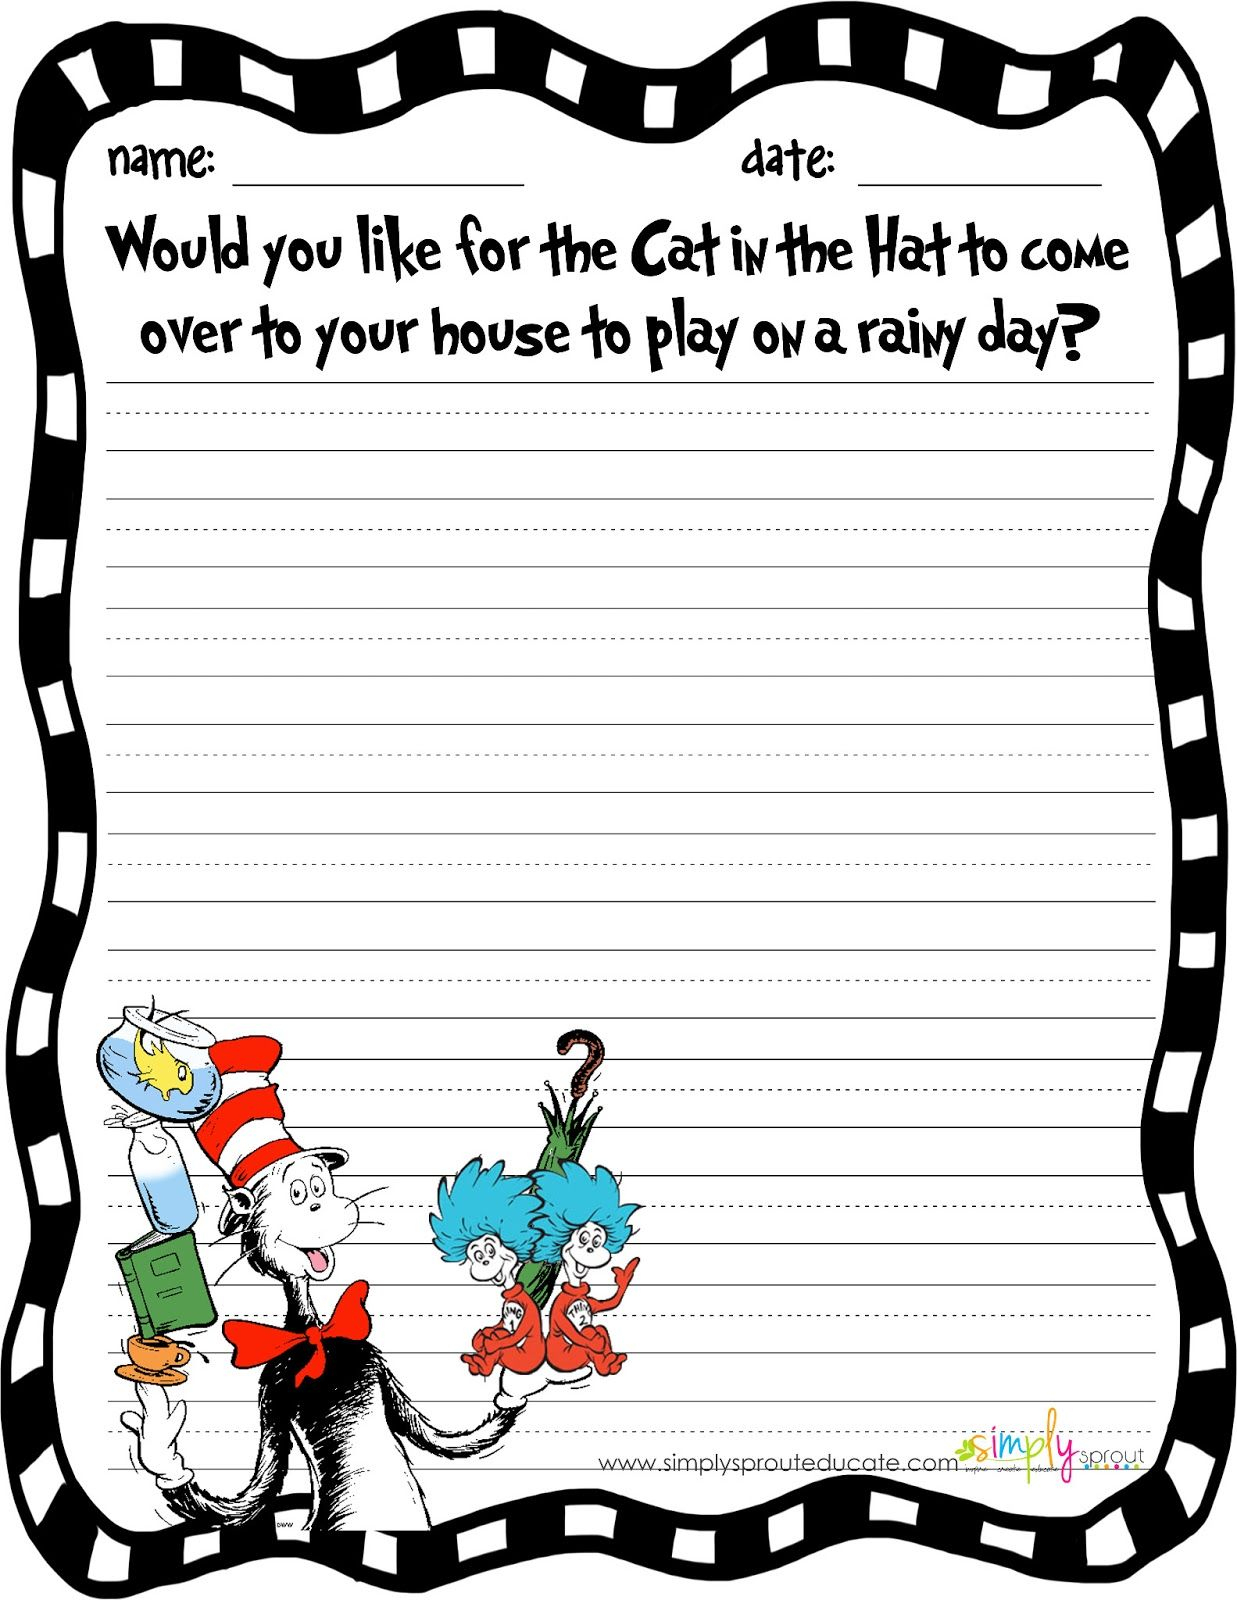 Celebrate Reading With The Cat In The Hat (With Images